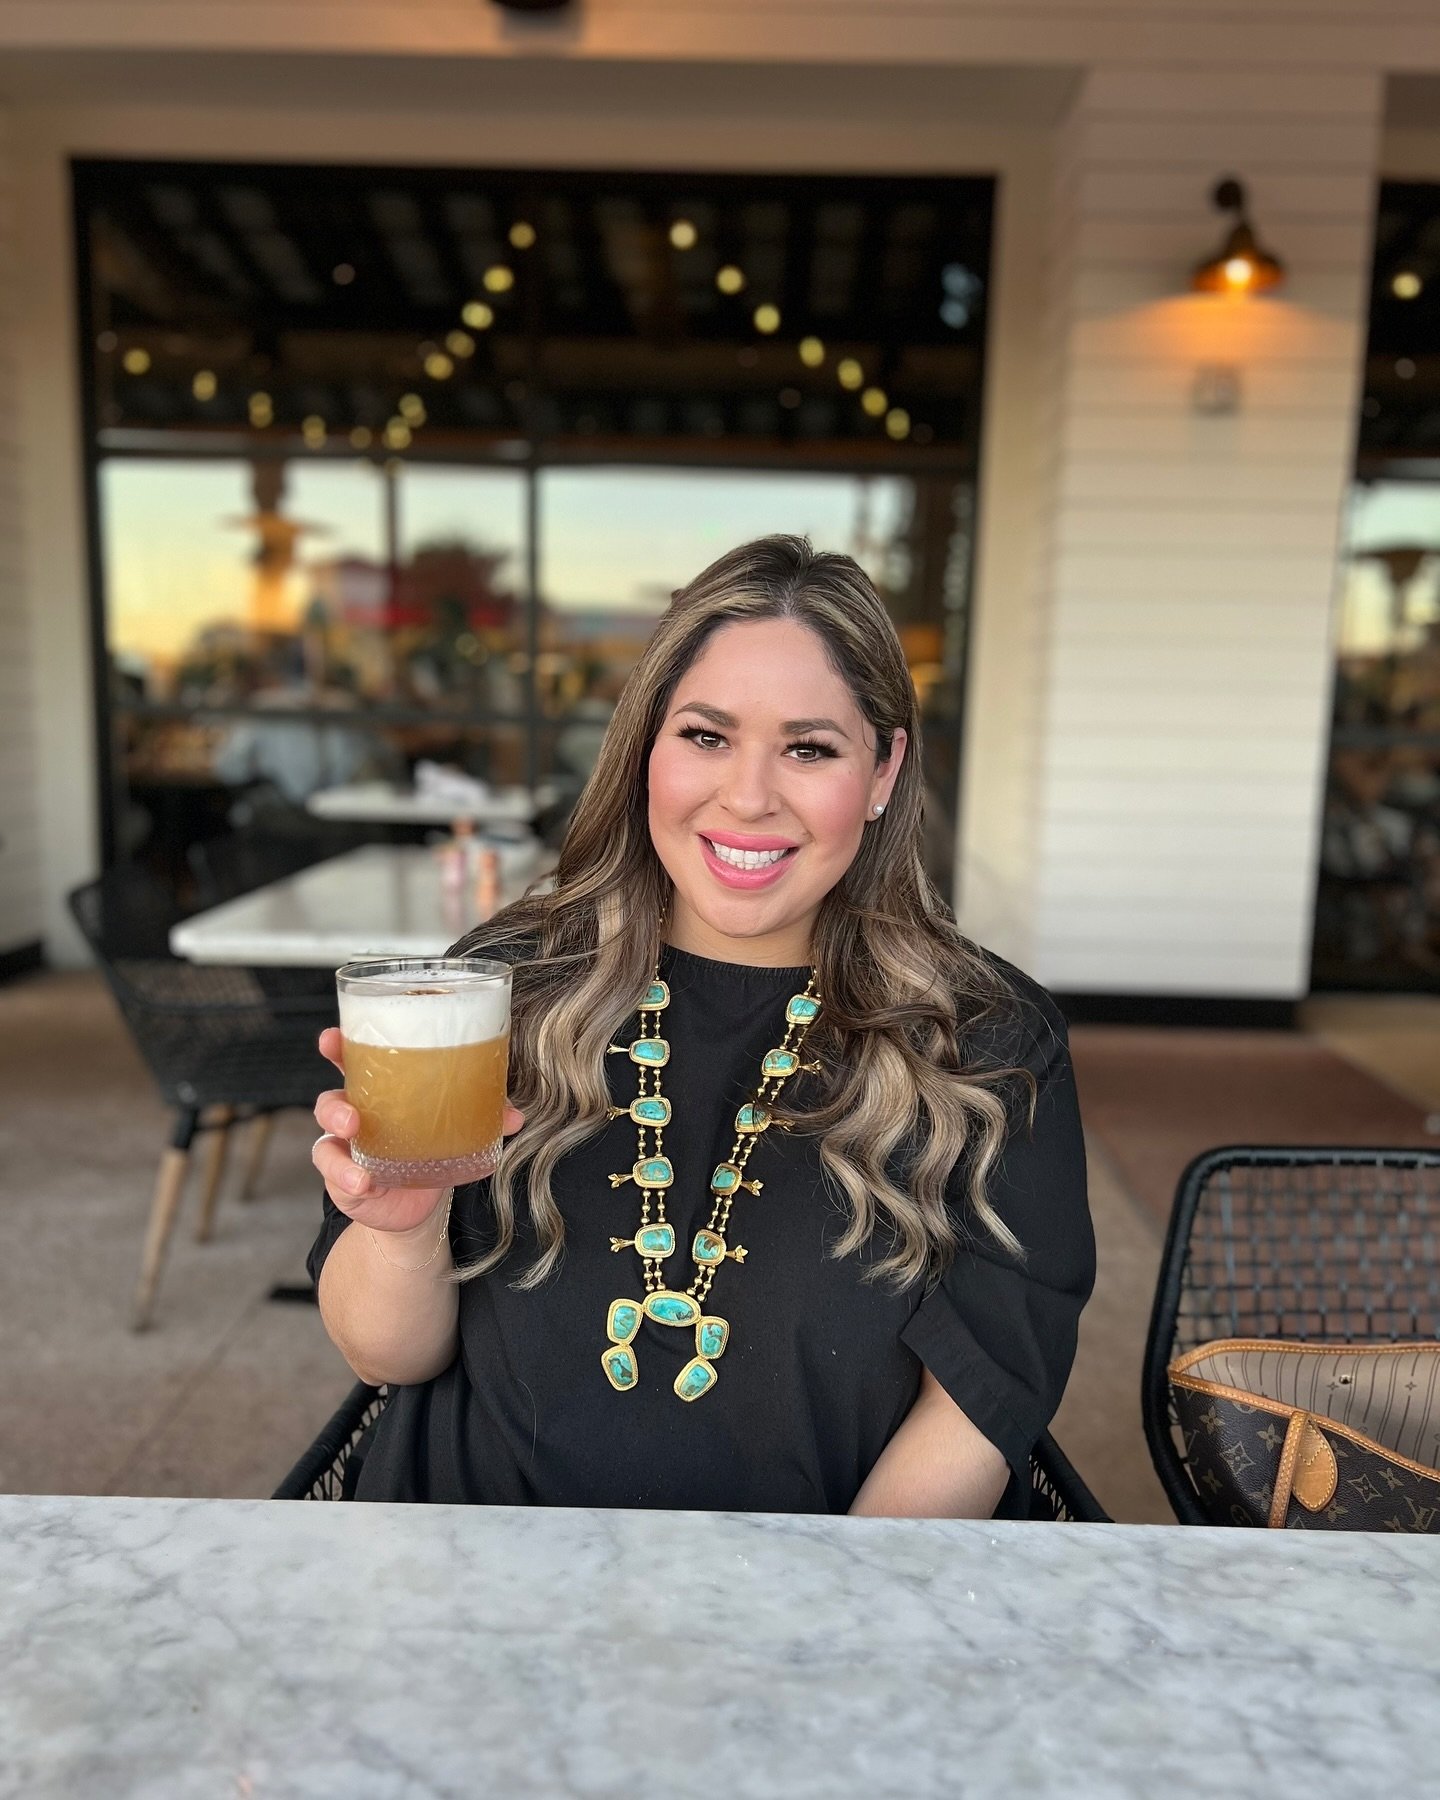 Enjoying the summer nights! If you&rsquo;re looking for a squash blossom necklace, I am OBSESSED with this one from @christinagreenejewelry 💙💙

#stylinbrunette #squashblossom #squashblossomnecklace #texaschic #summeroutfit #summernights